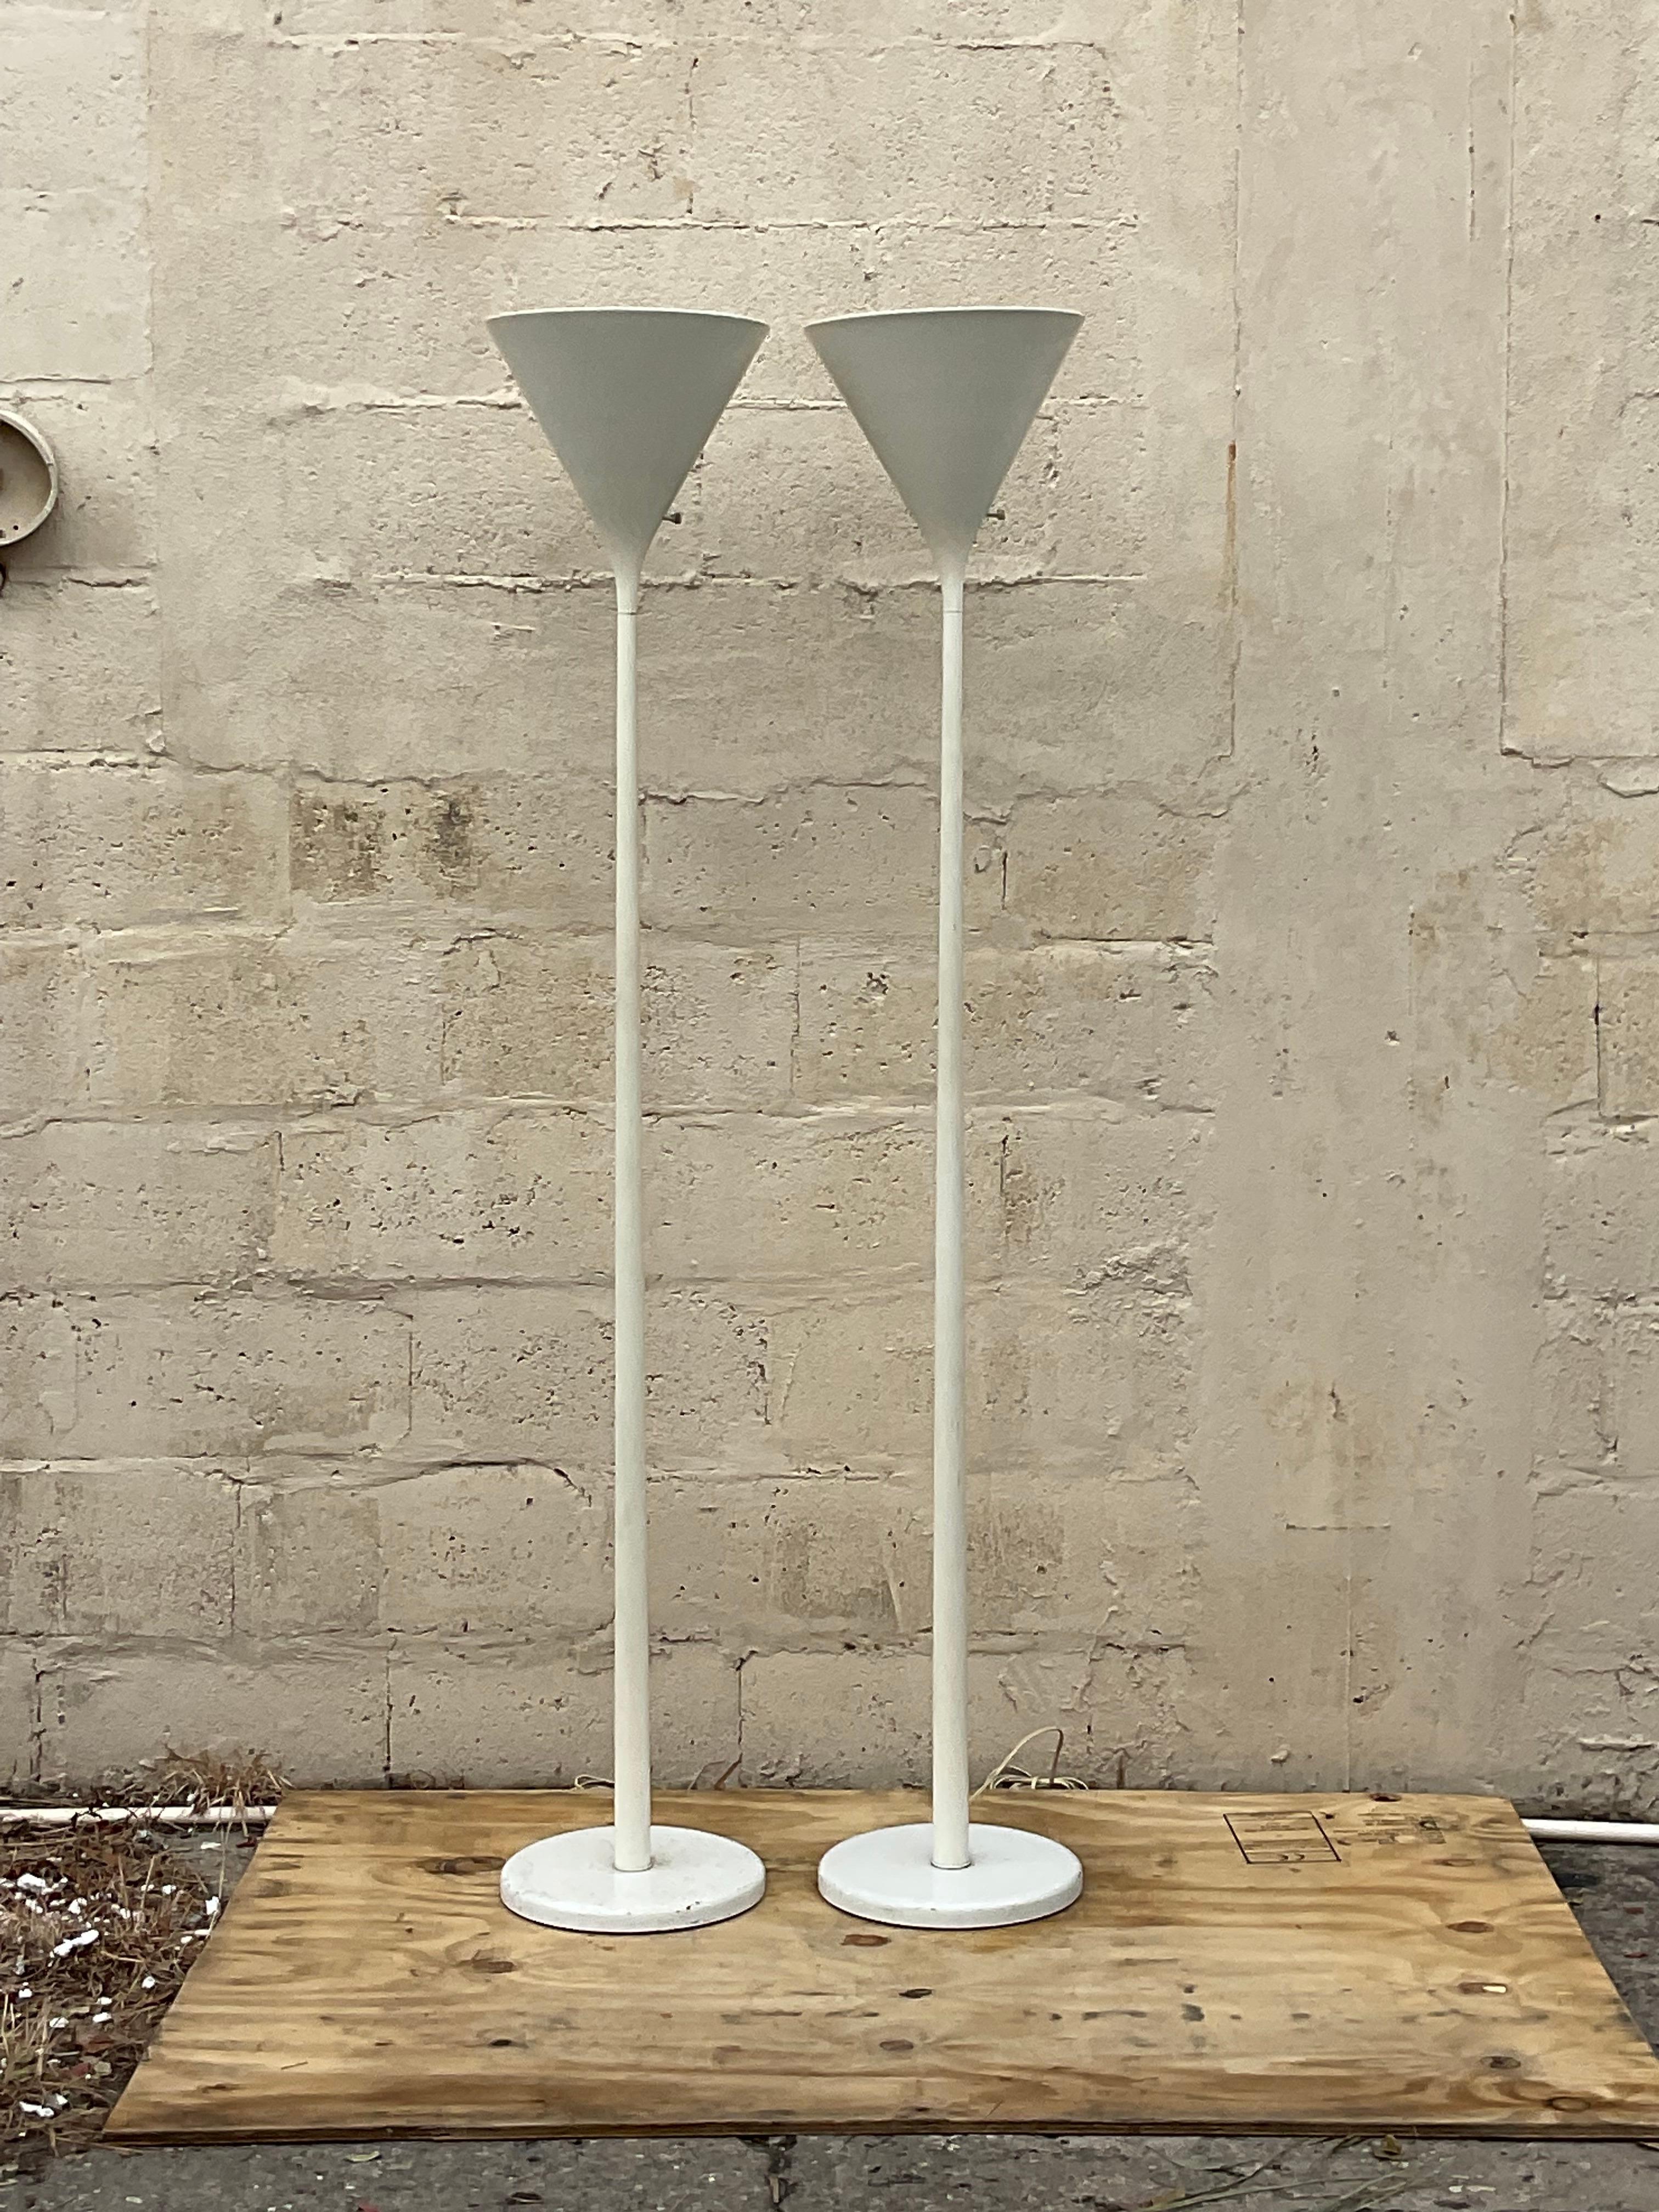 Vintage Boho Signed Nessen Cone Floor Lamps - a Pair For Sale 1